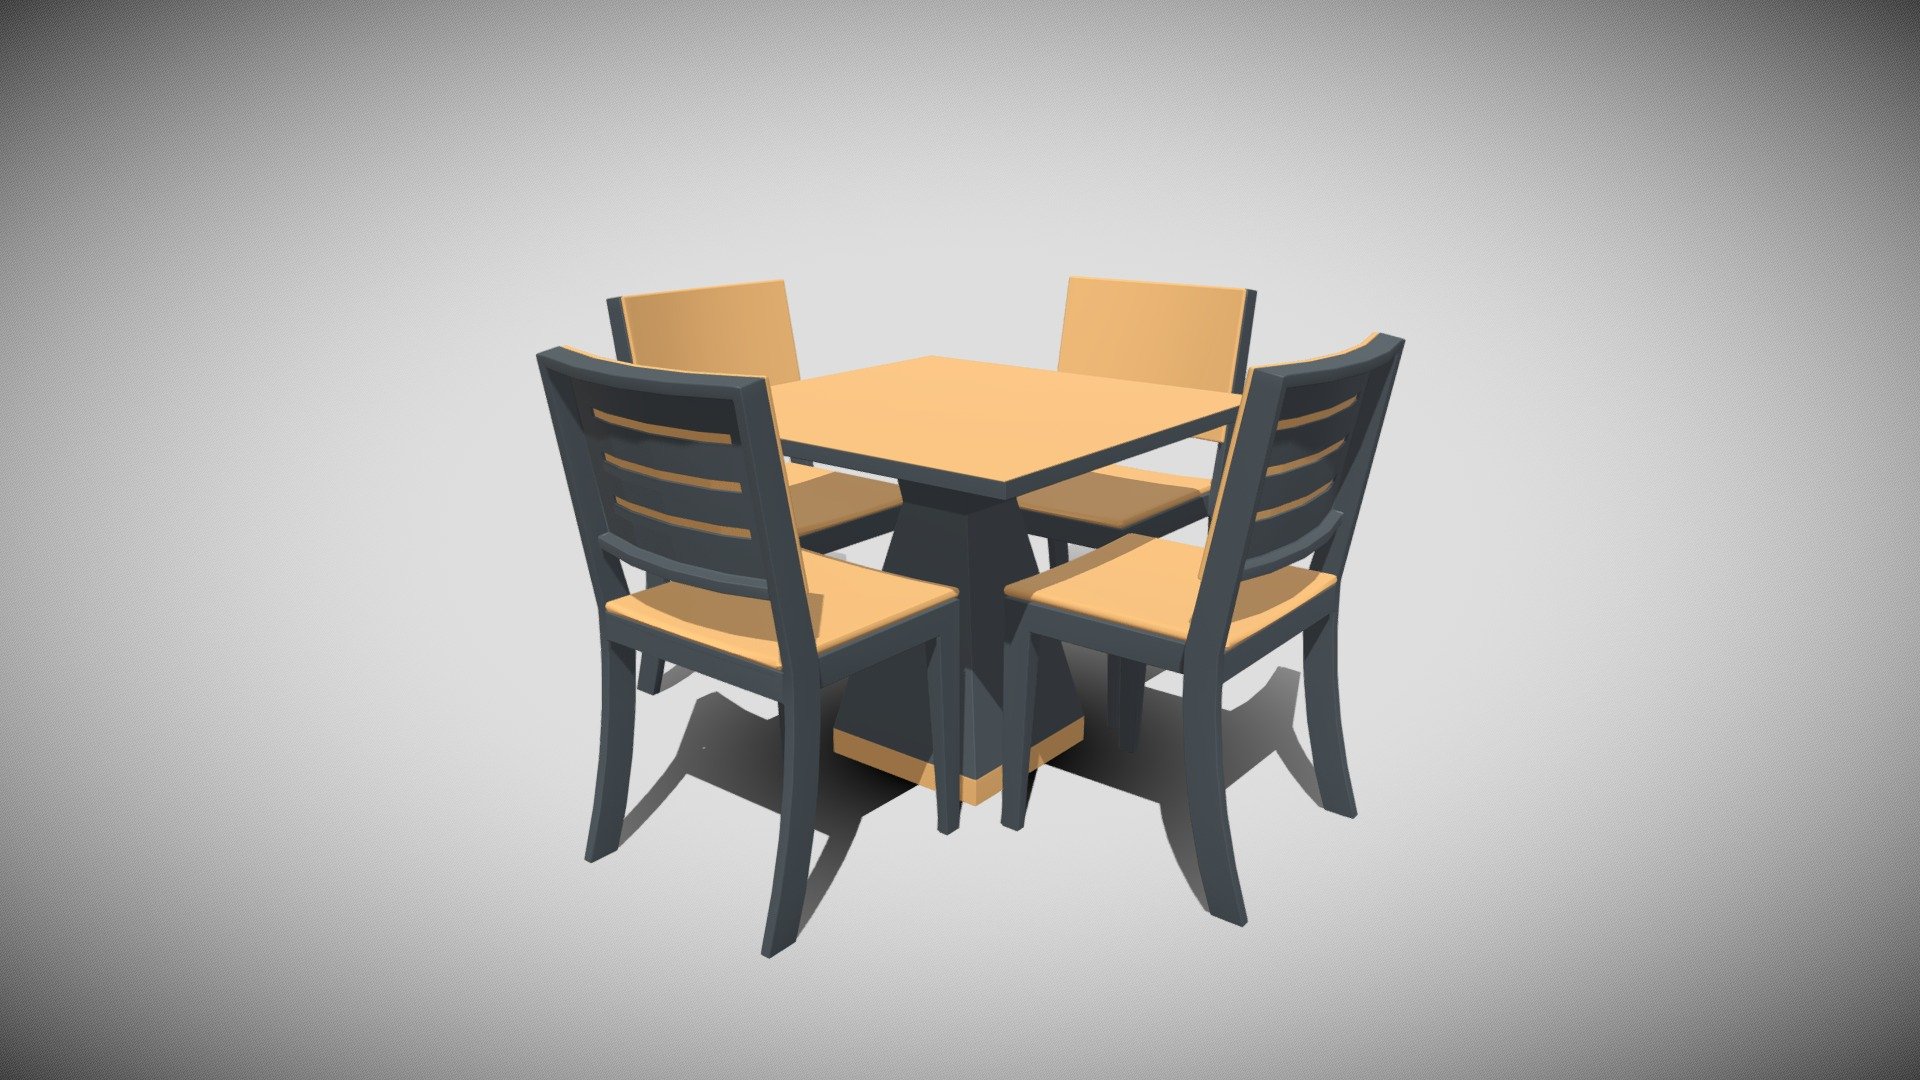 Detailed model of a Restaurant Chair And Table, modeled in Cinema 4D.The model was created using approximate real world dimensions.

The model has 968 polys and 923 vertices.

An additional file has been provided containing the original Cinema 4D project files and other 3d export files such as 3ds, fbx and obj 3d model